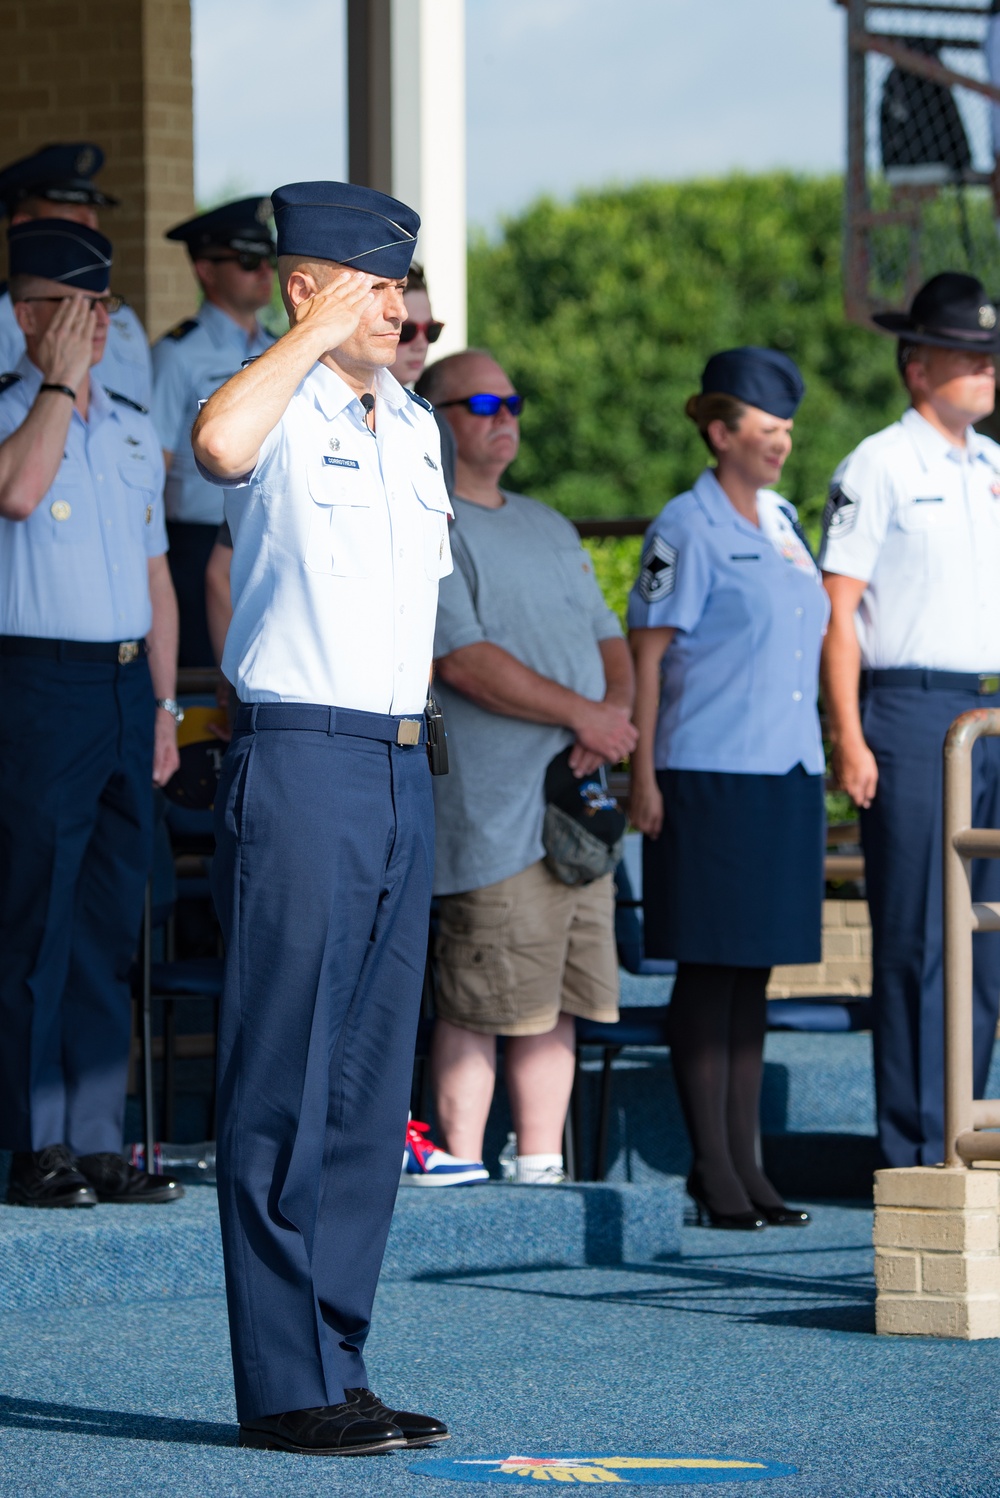 737th Training Group Change of Command Ceremony Jun 14, 2019